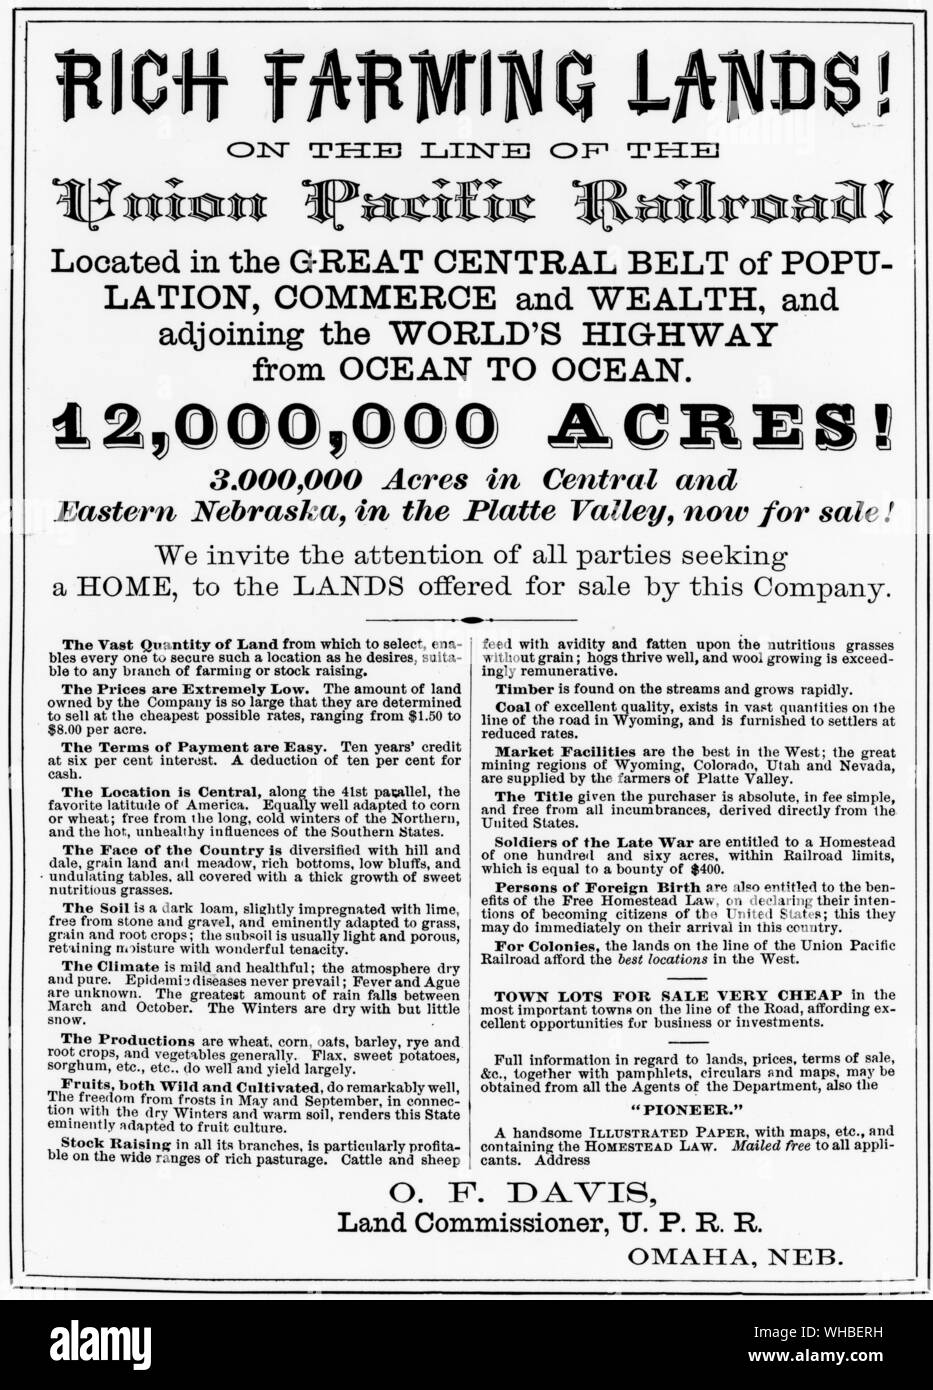 Emigrant poster advertising Rich Farm Lands on the line of the Union Pacific Railroad located in the great central belt of population, commerce and wealth, and adjoining the world's highway from ocean to ocean 12,000,000 acres - signed by O. F. Davis, Land Commissioner UPRR Omaha, Neb.. Stock Photo